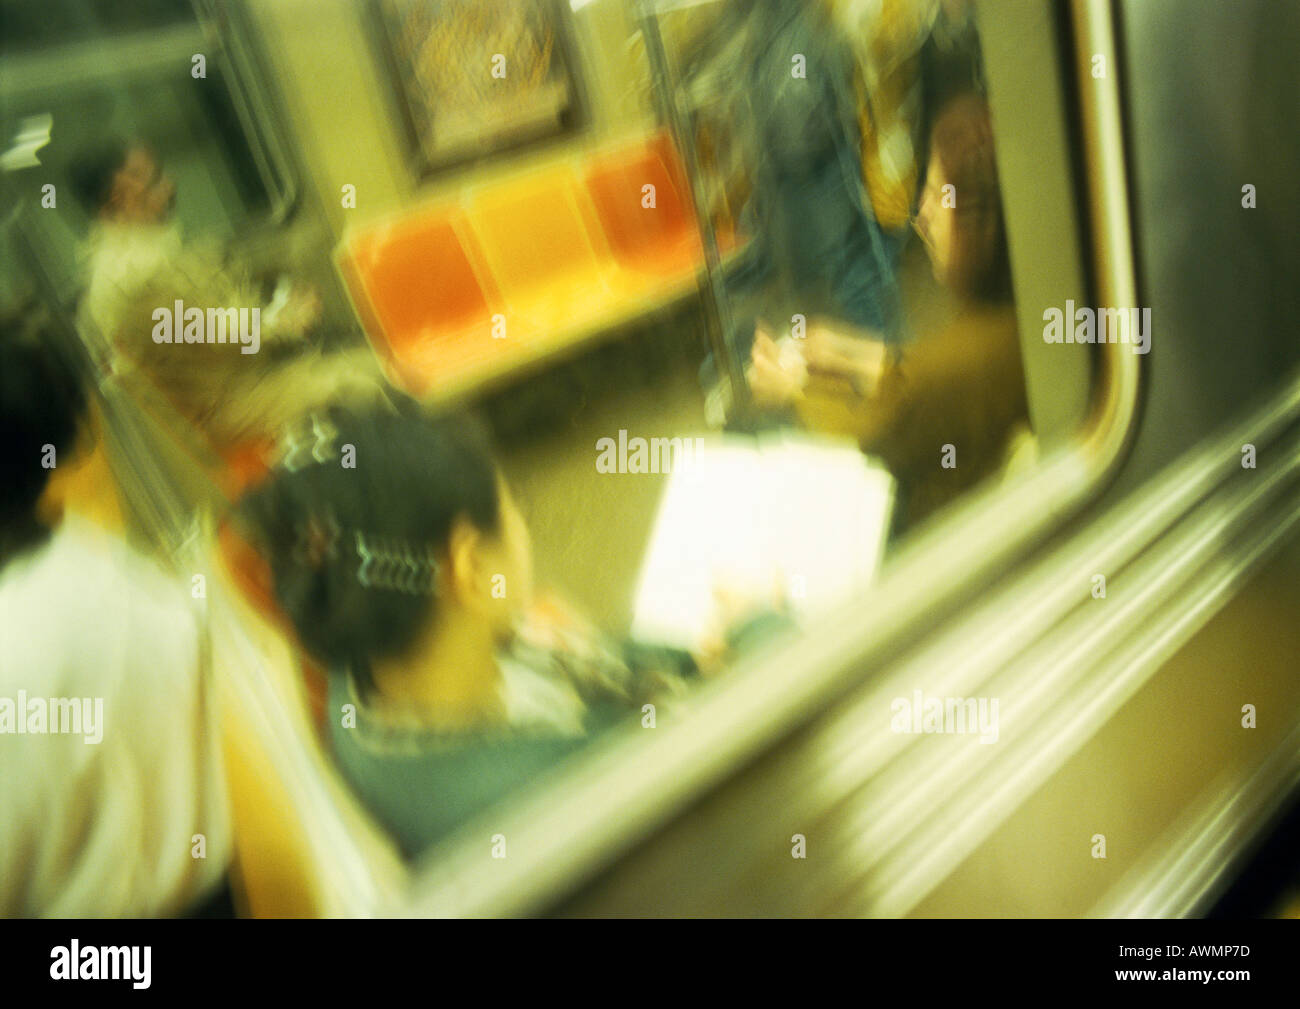 People in subway, viewed from outside, blurred Stock Photo